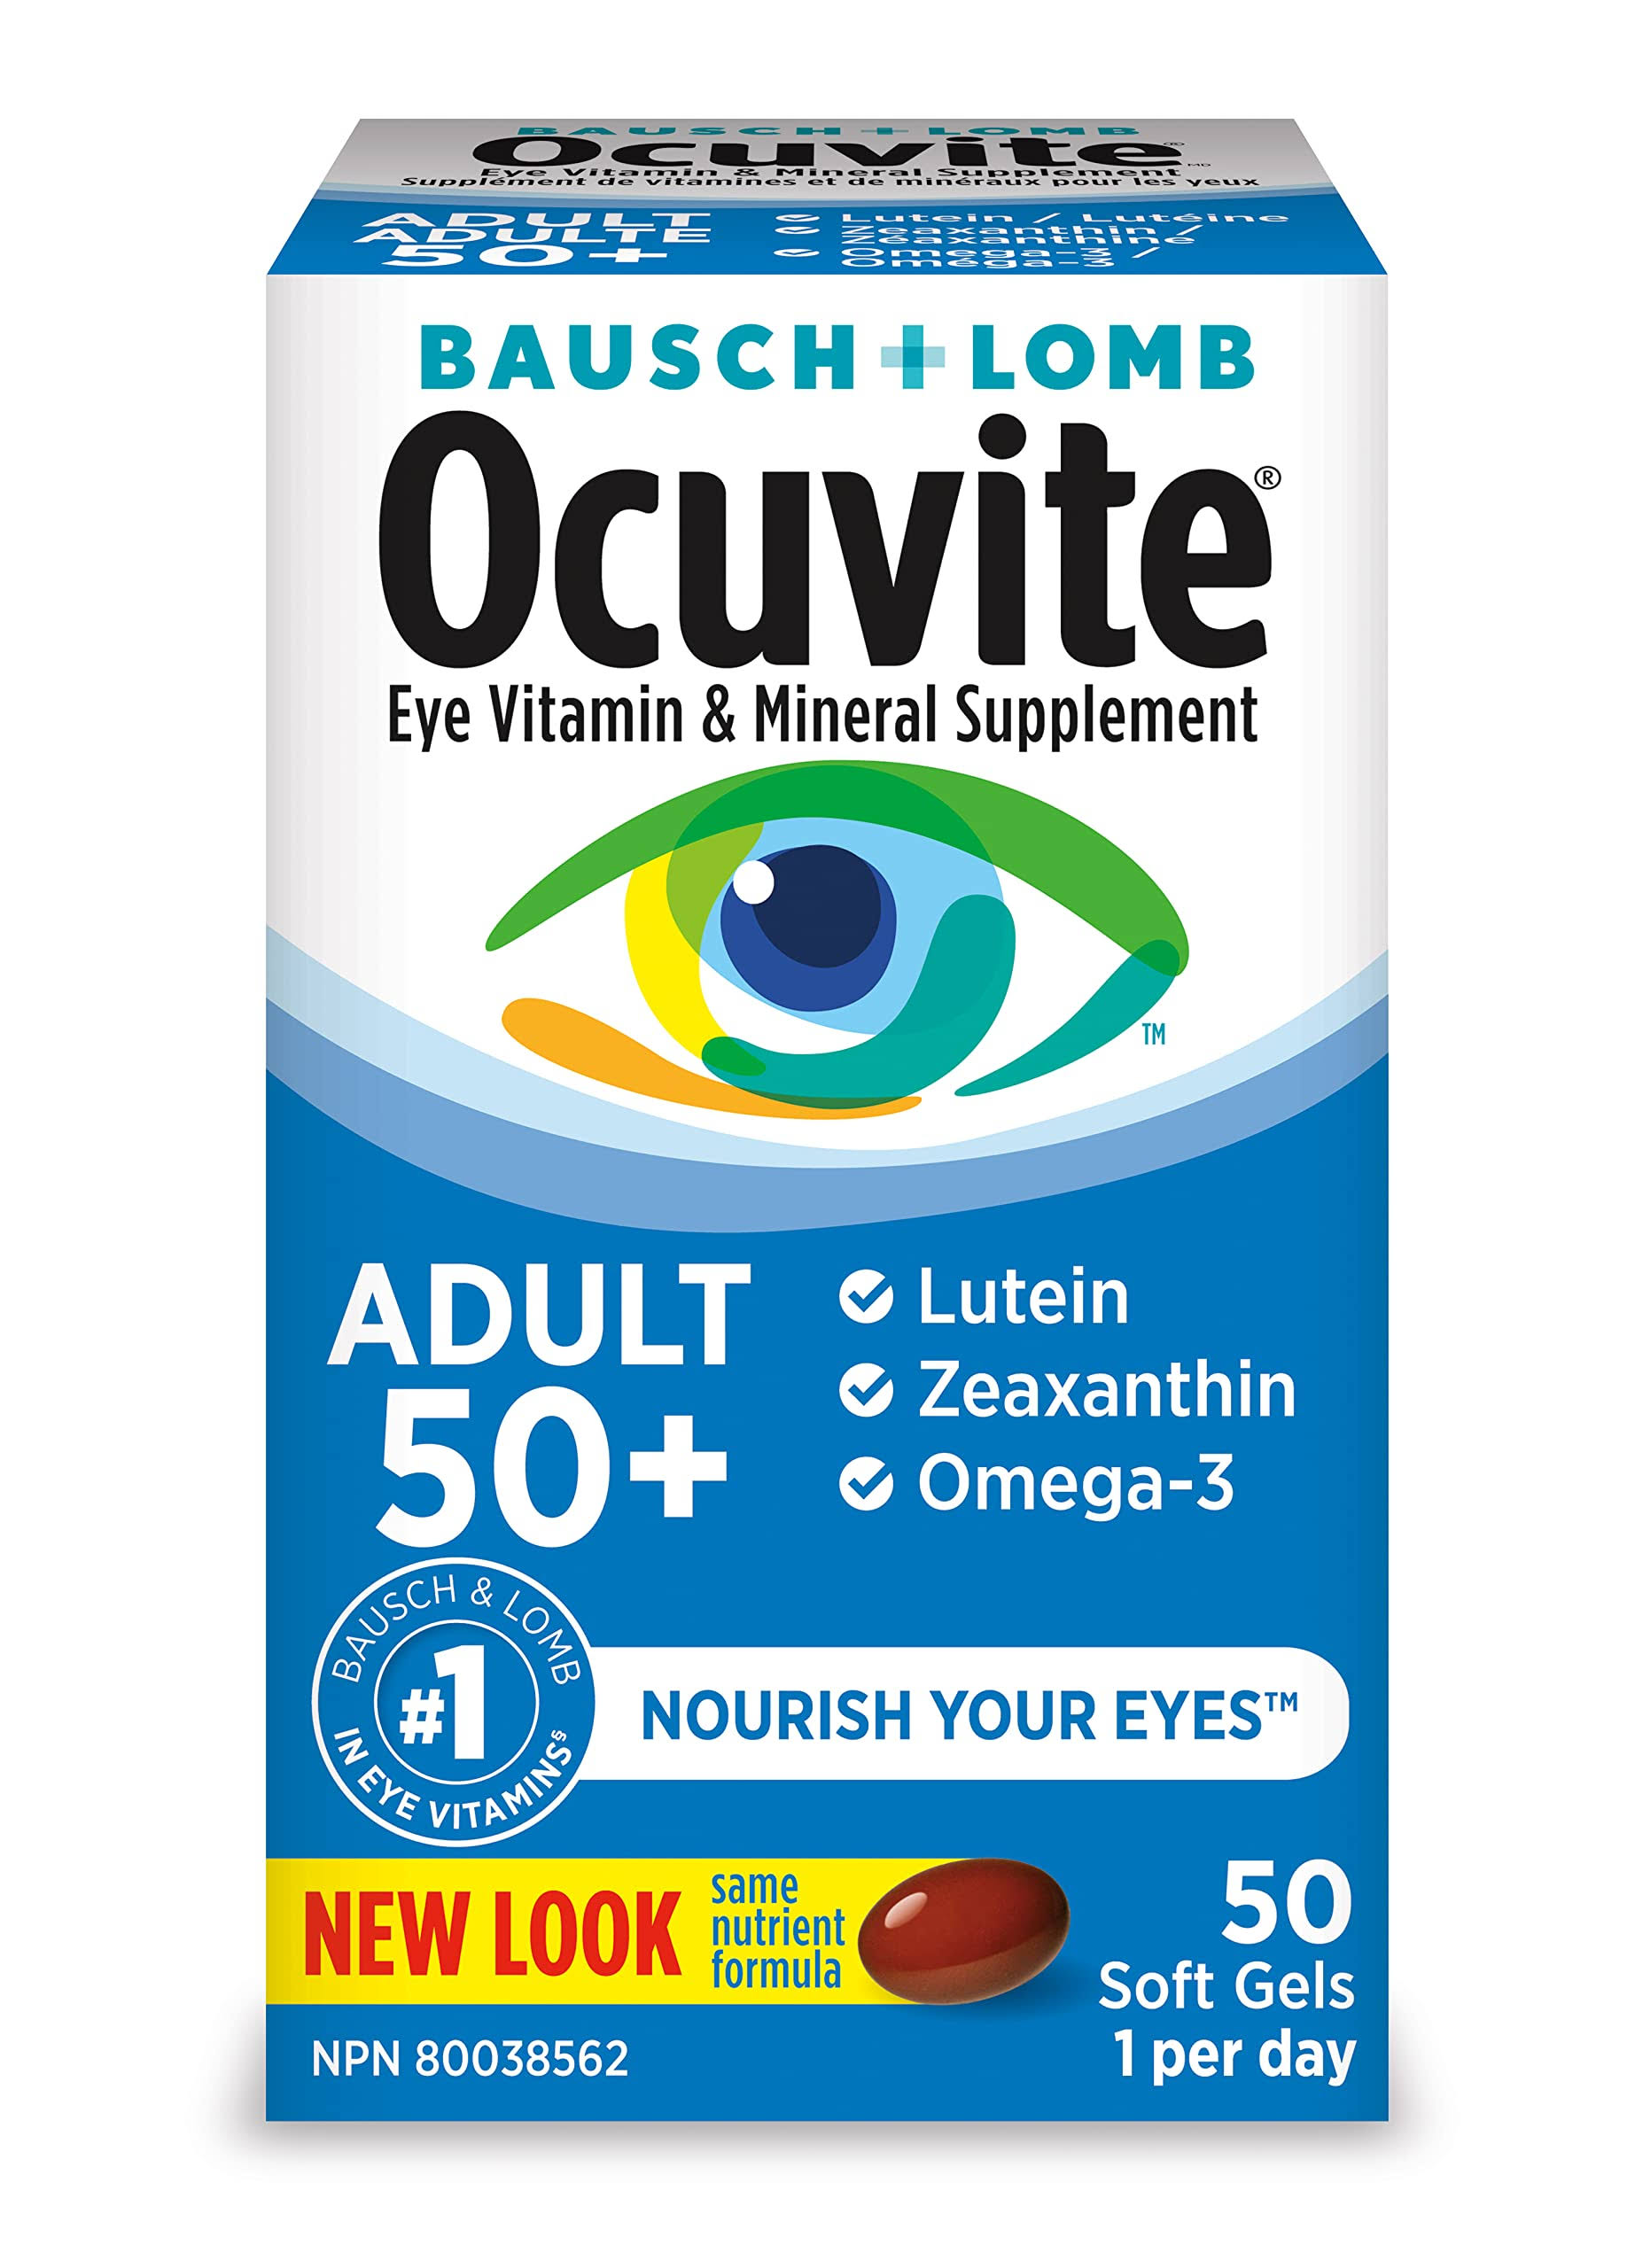 Bausch & Lomb Ocuvite Adult 50+ Eye Vitamin and Mineral Supplement - 50ct